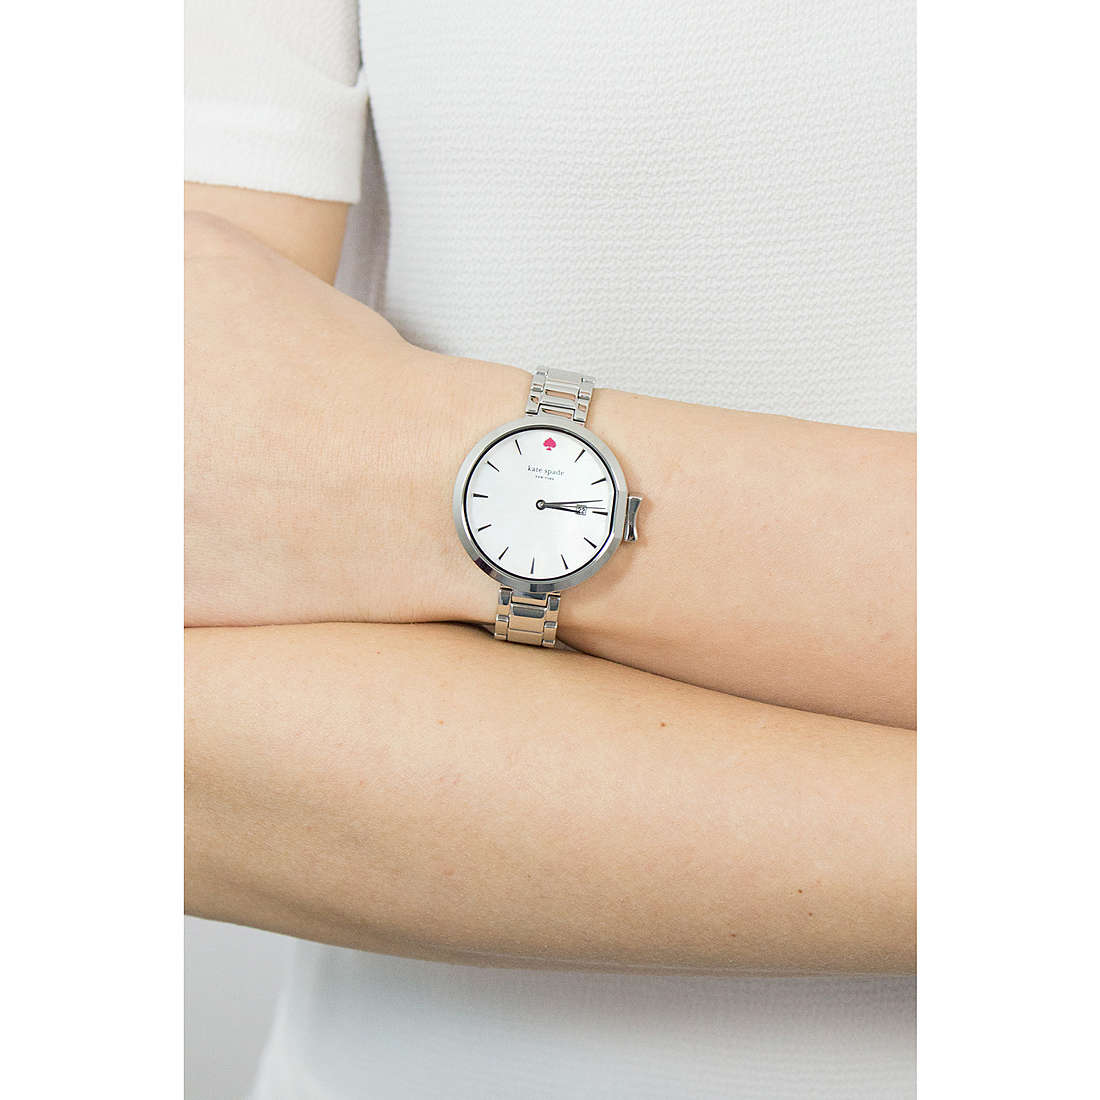 Kate Spade New York only time Park Row woman KSW1267 wearing